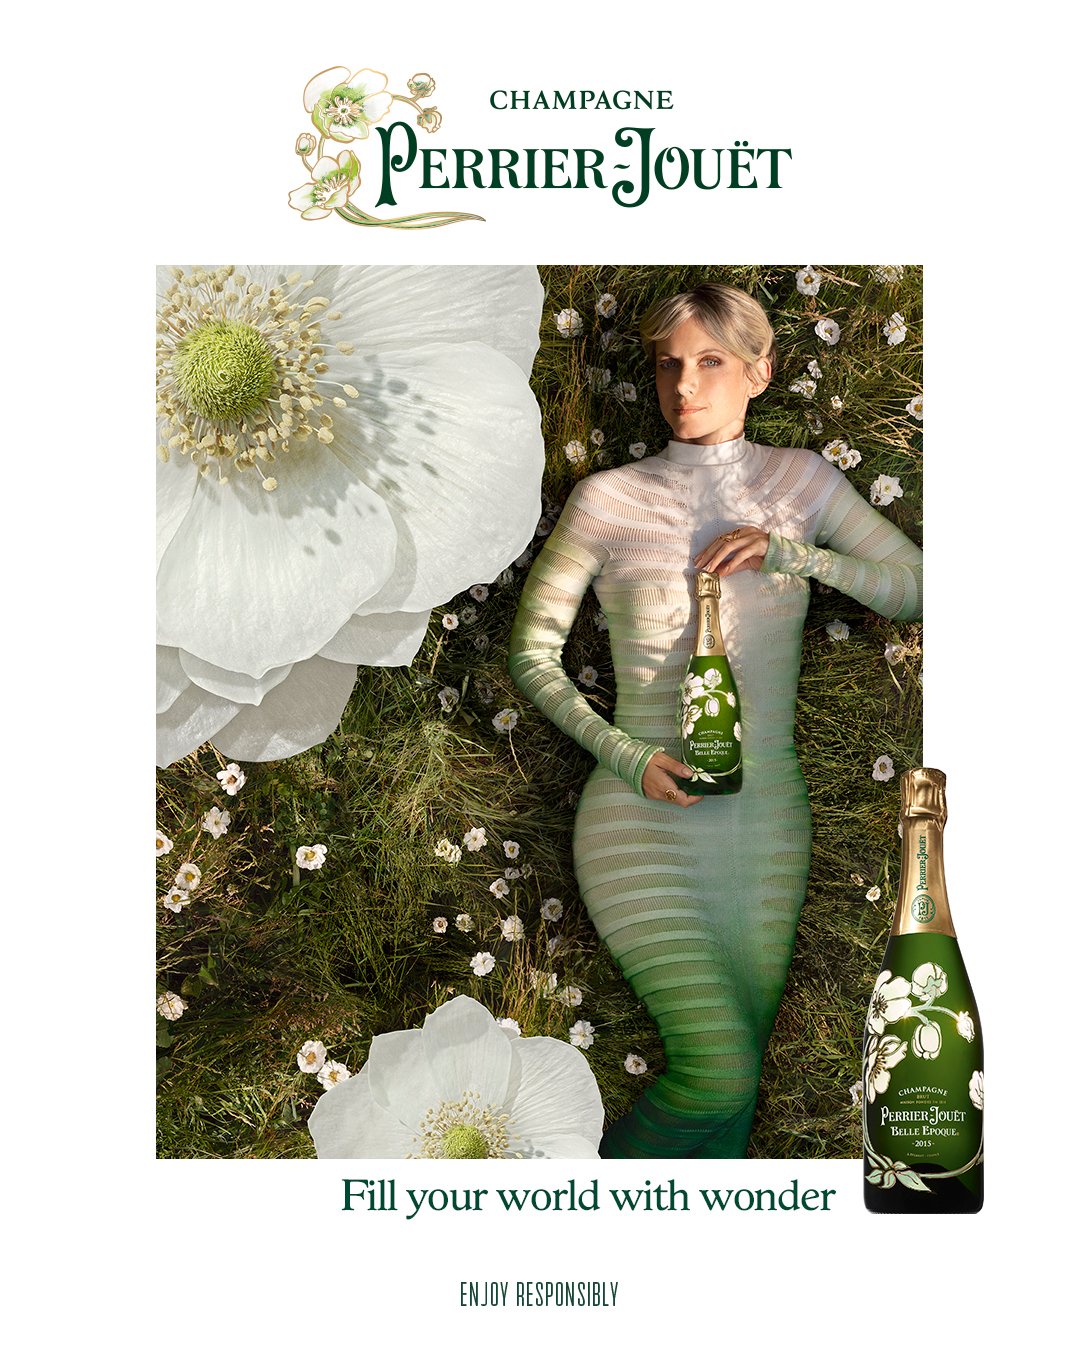 Perrier-Jouet House of Wonder Fill Your World With Wonder-1